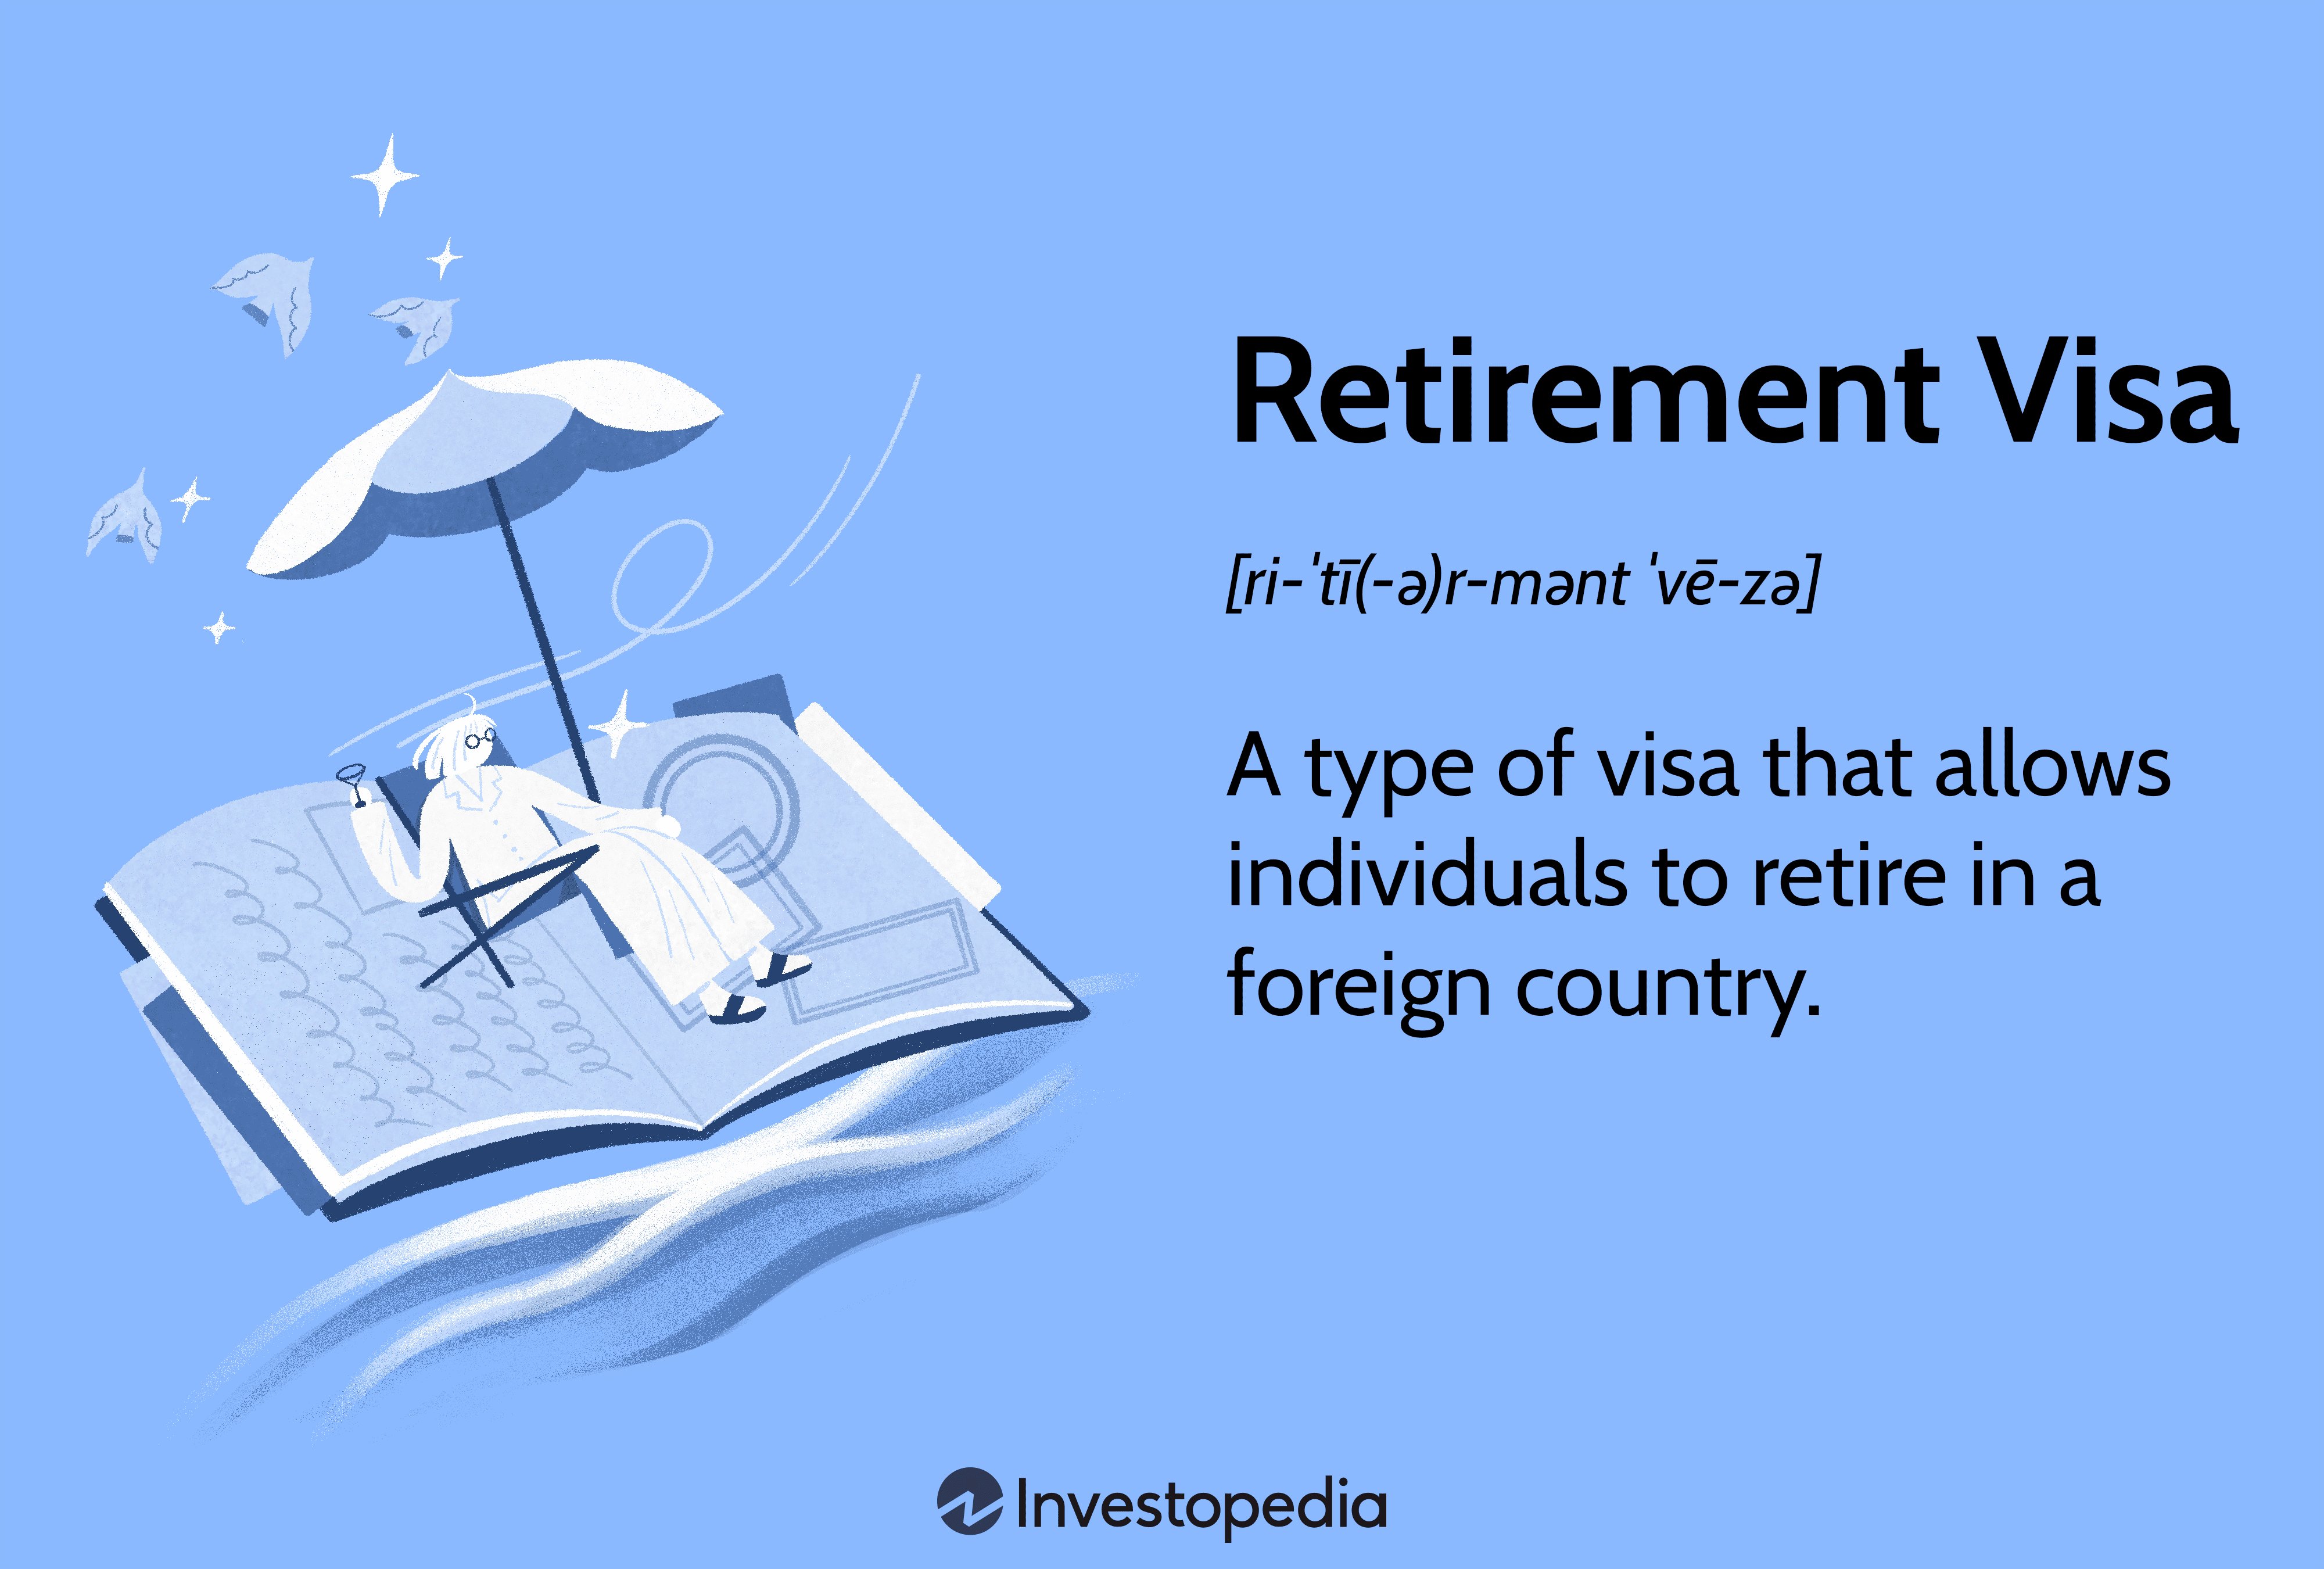 Retirement Visas: A type of visa that allows individuals to retire in a foreign country.